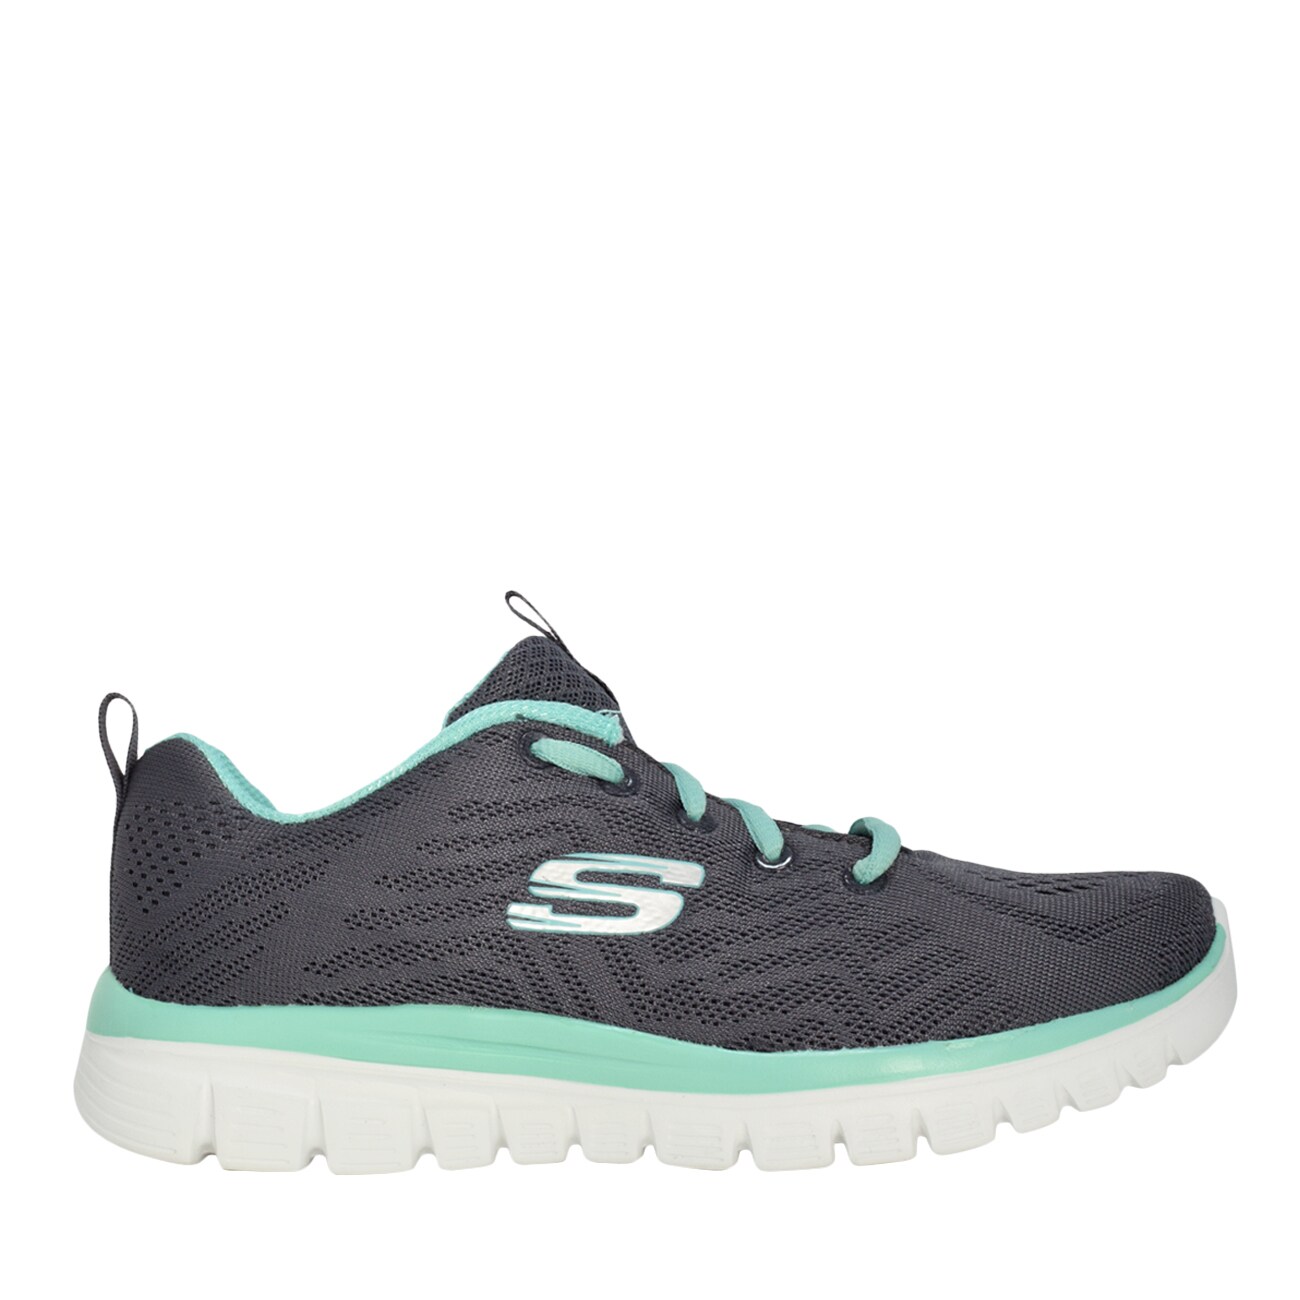 Skechers Graceful-Get Connected Sneaker | The Shoe Company